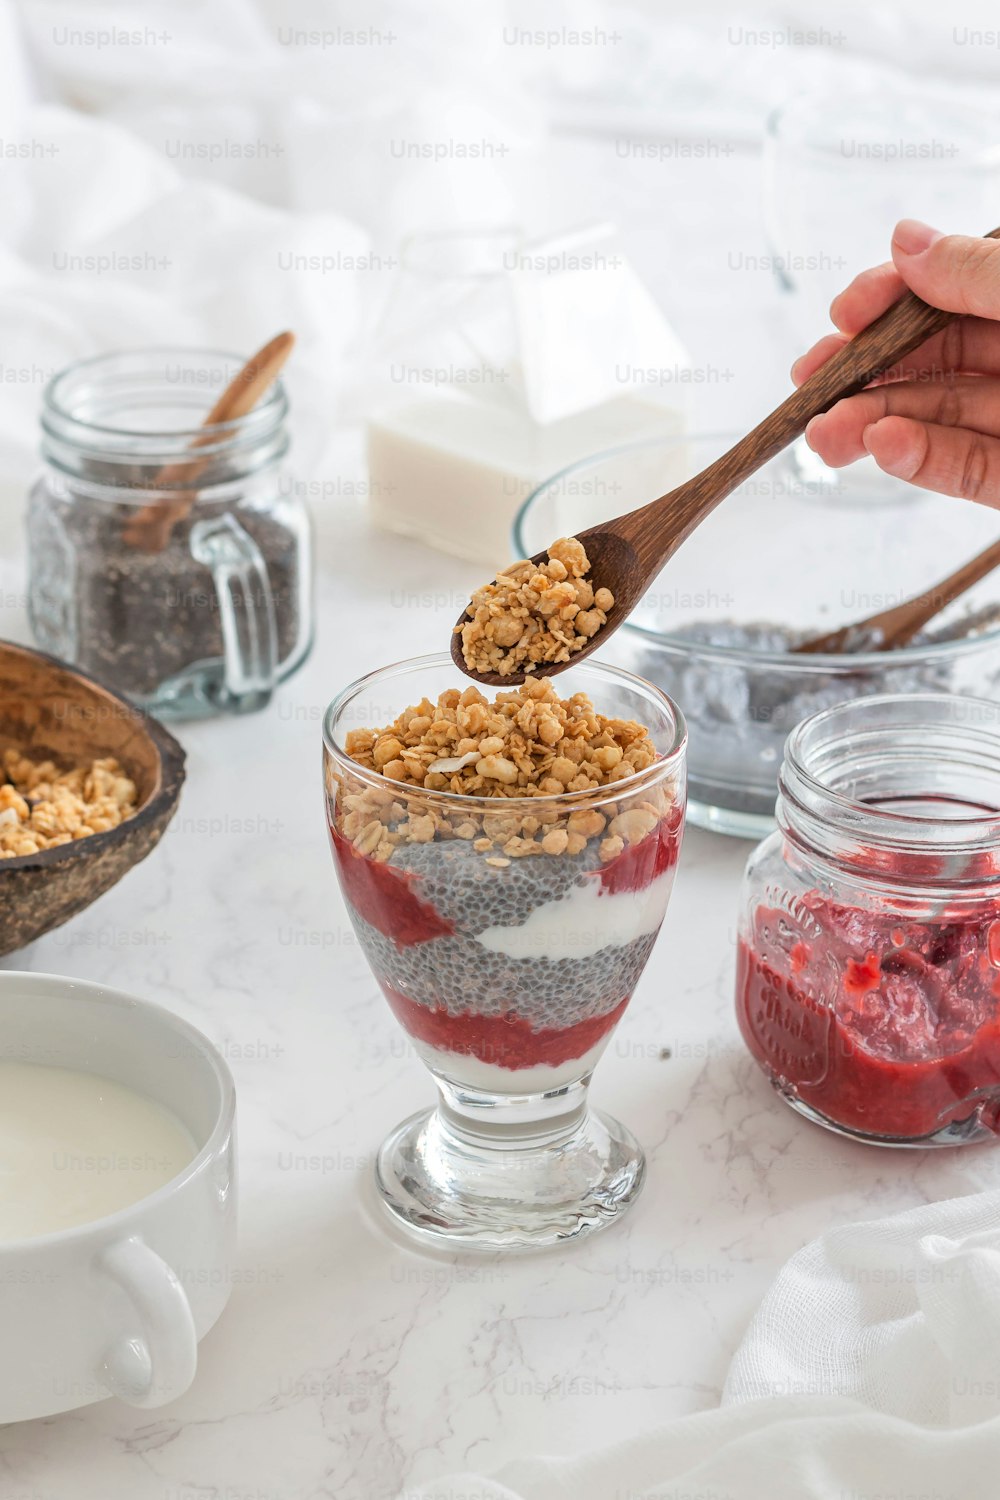 a person spoons a spoonful of granola into a glass